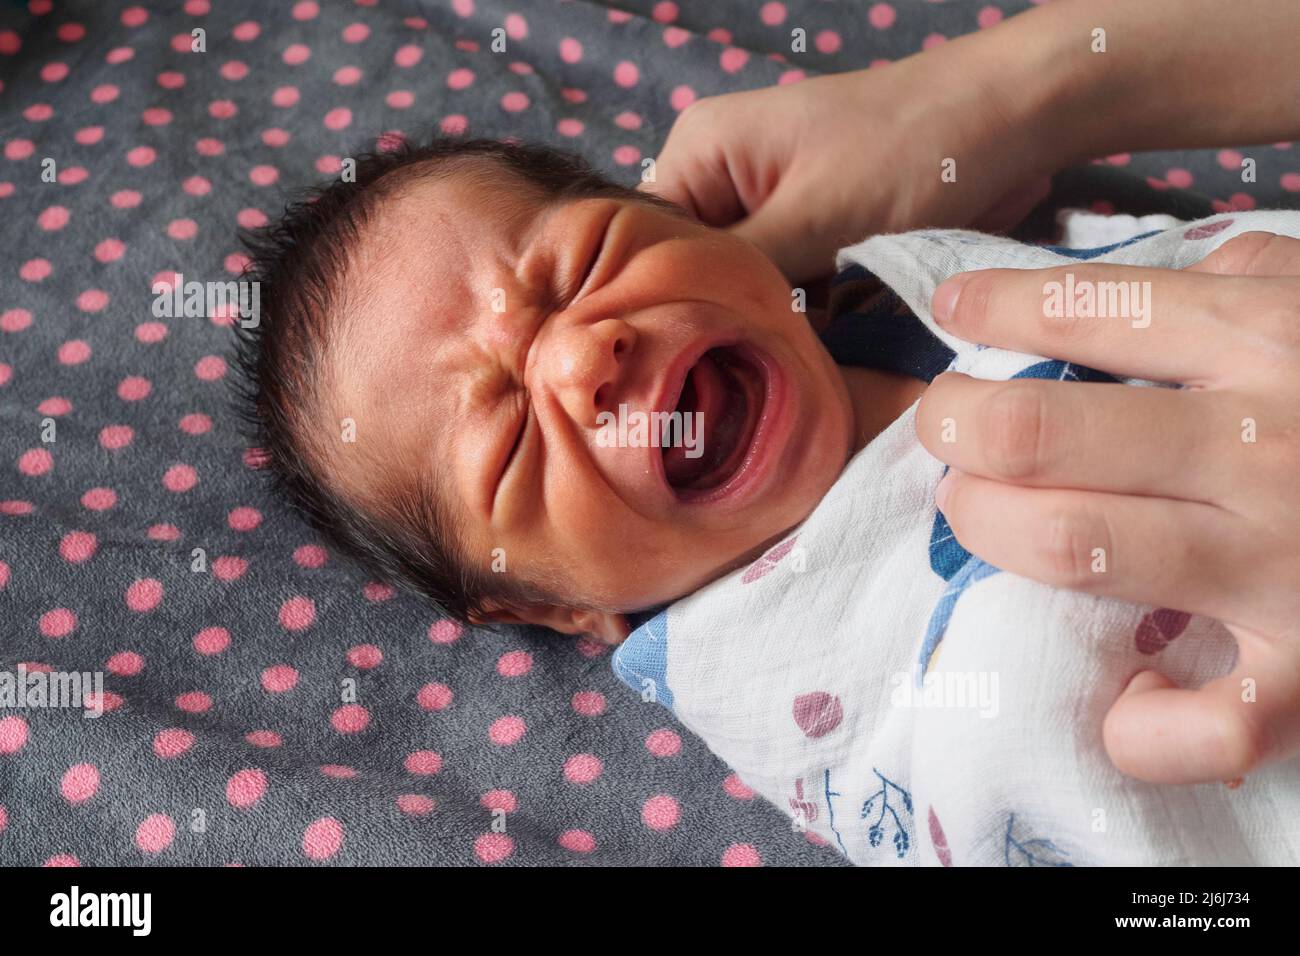 newborn baby boy crying after bathing at children's bedroom in the morning. family, love and life concept. Stock Photo